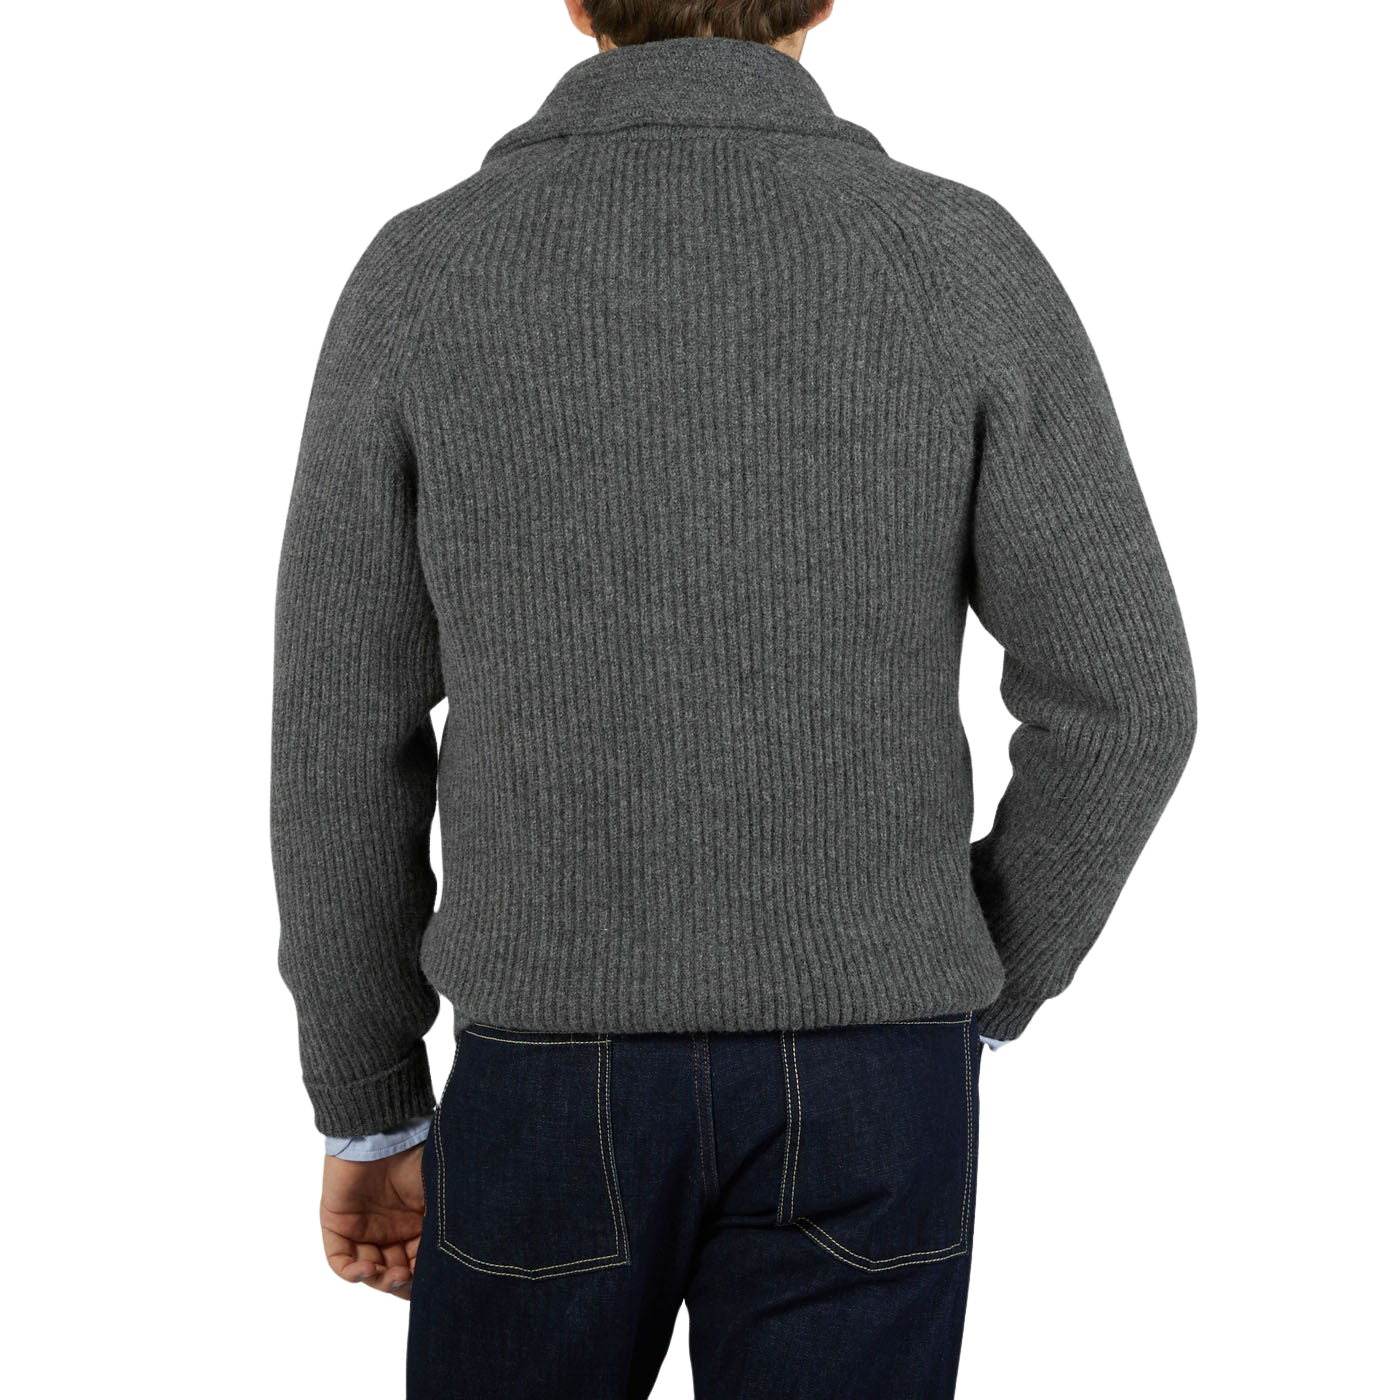 The back view of a man wearing a William Lockie Cliff Grey Lambswool Shawl Collar Cardigan with leather buttons.